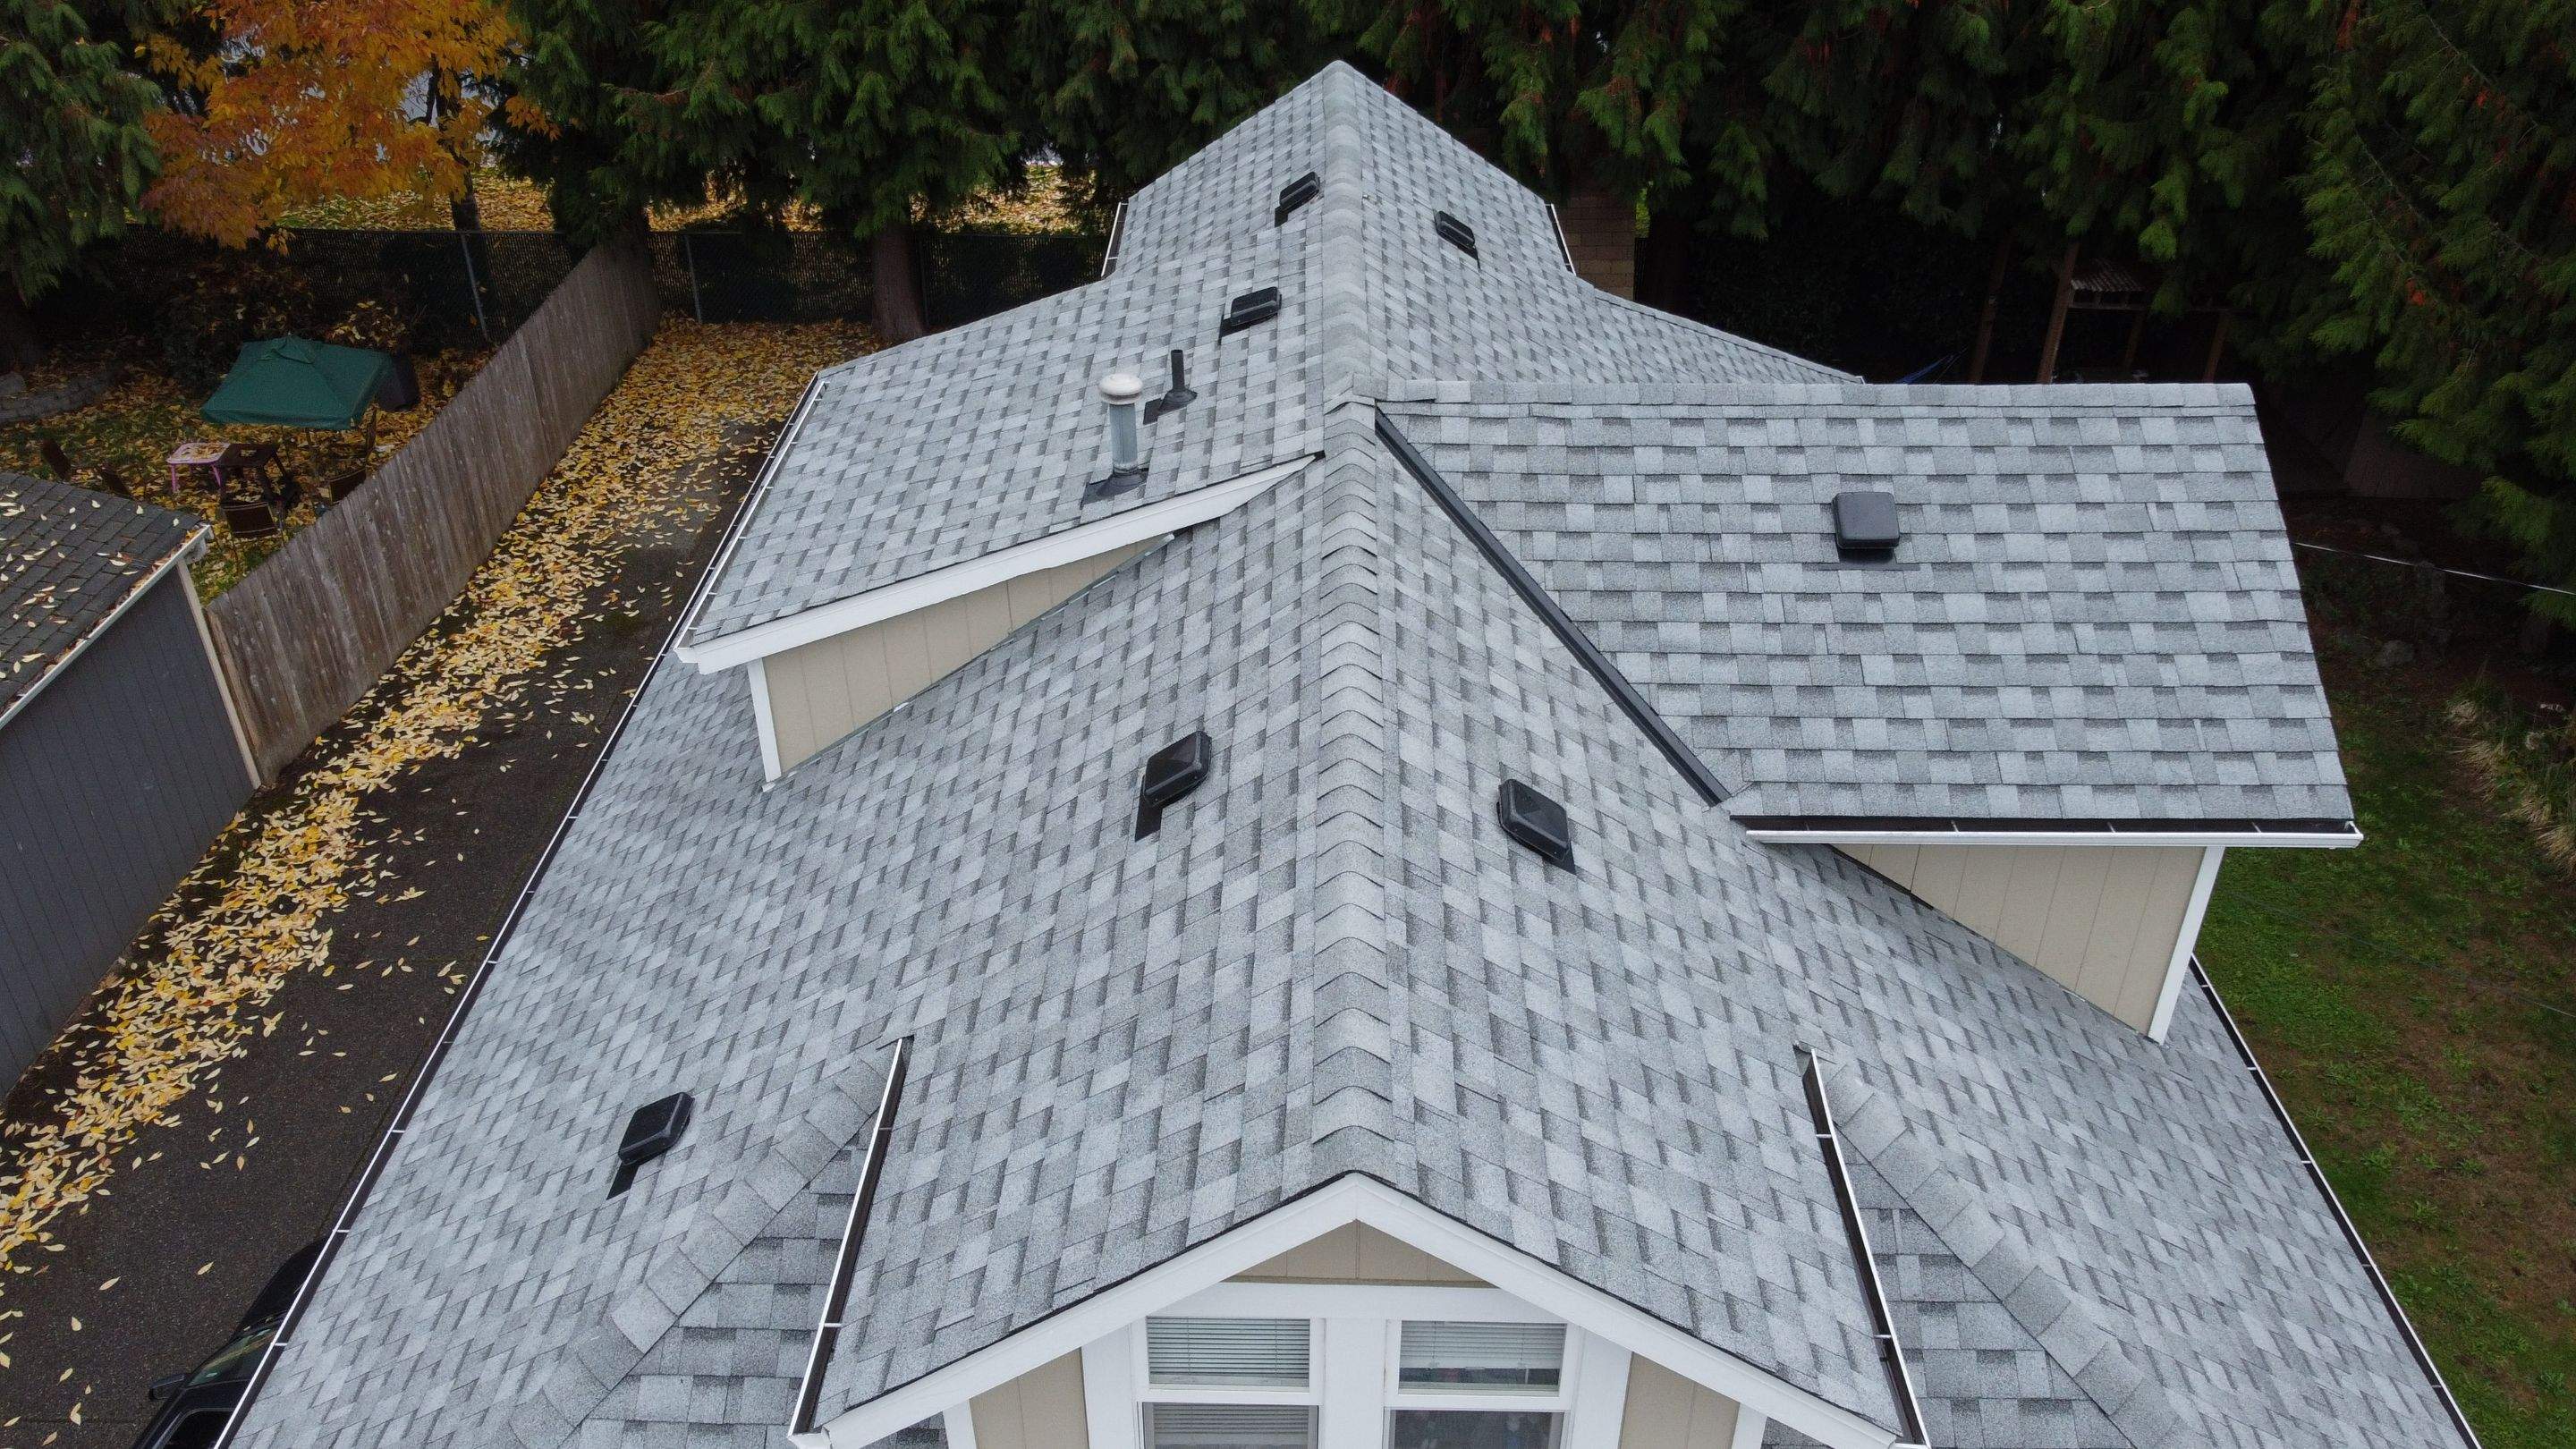 New Residential Roof with white shingles taken from a drone. The Benefits of Energy-Efficient Impact of roofing materials